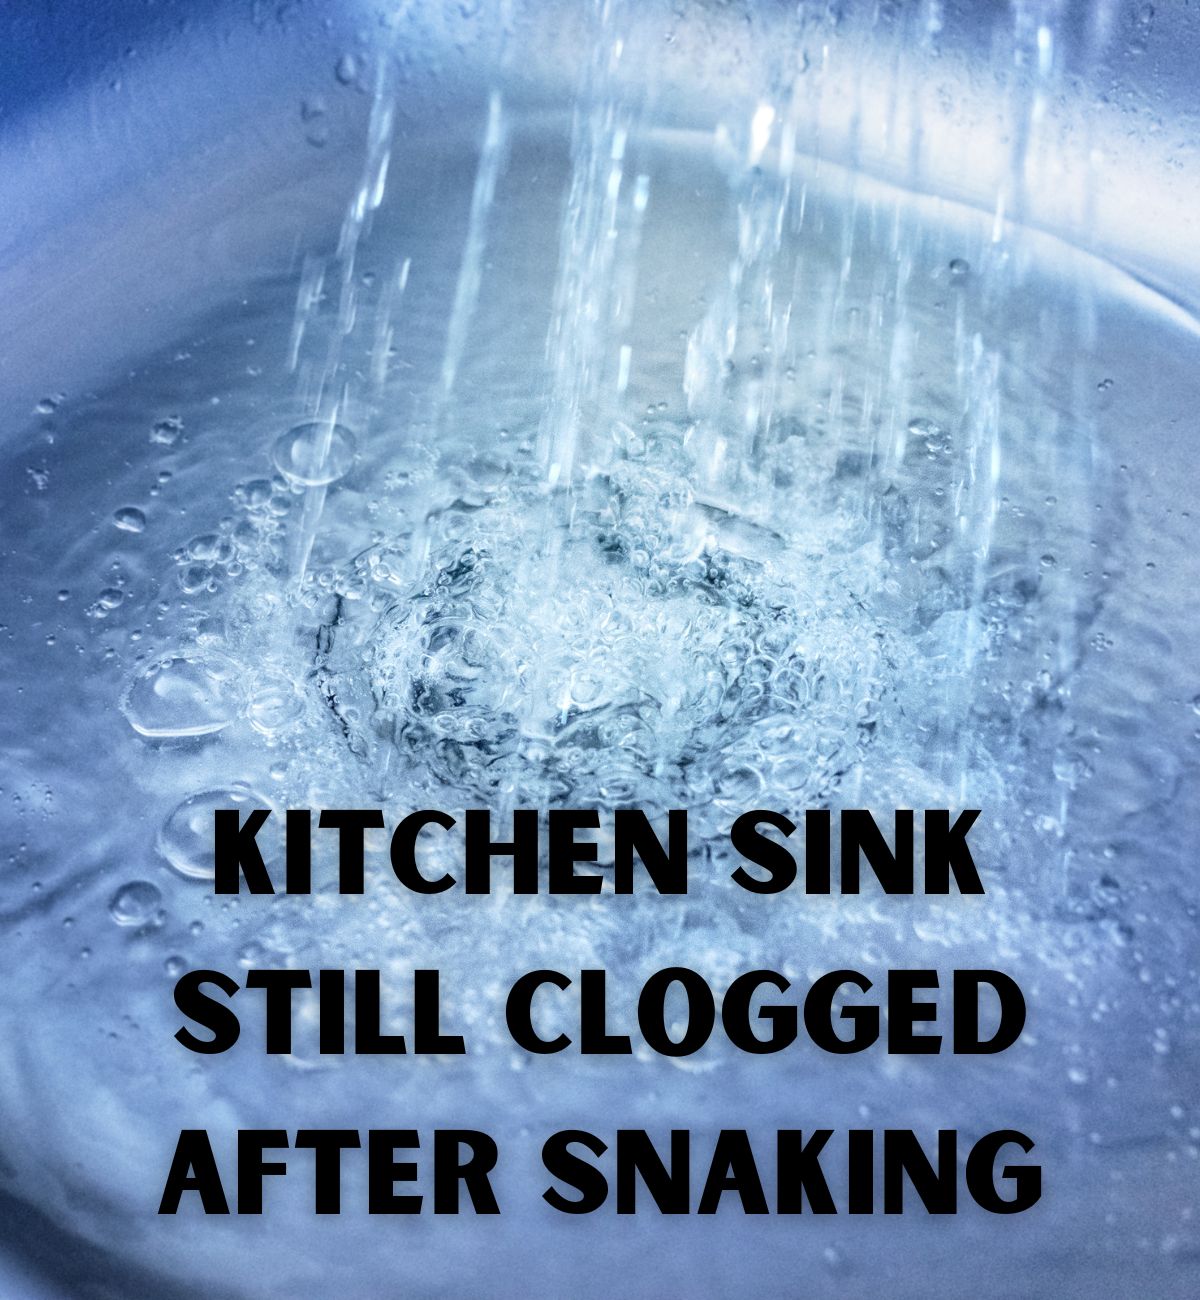 Clogged Kitchen Sink? Here Are 4 Easy Fixes to Try